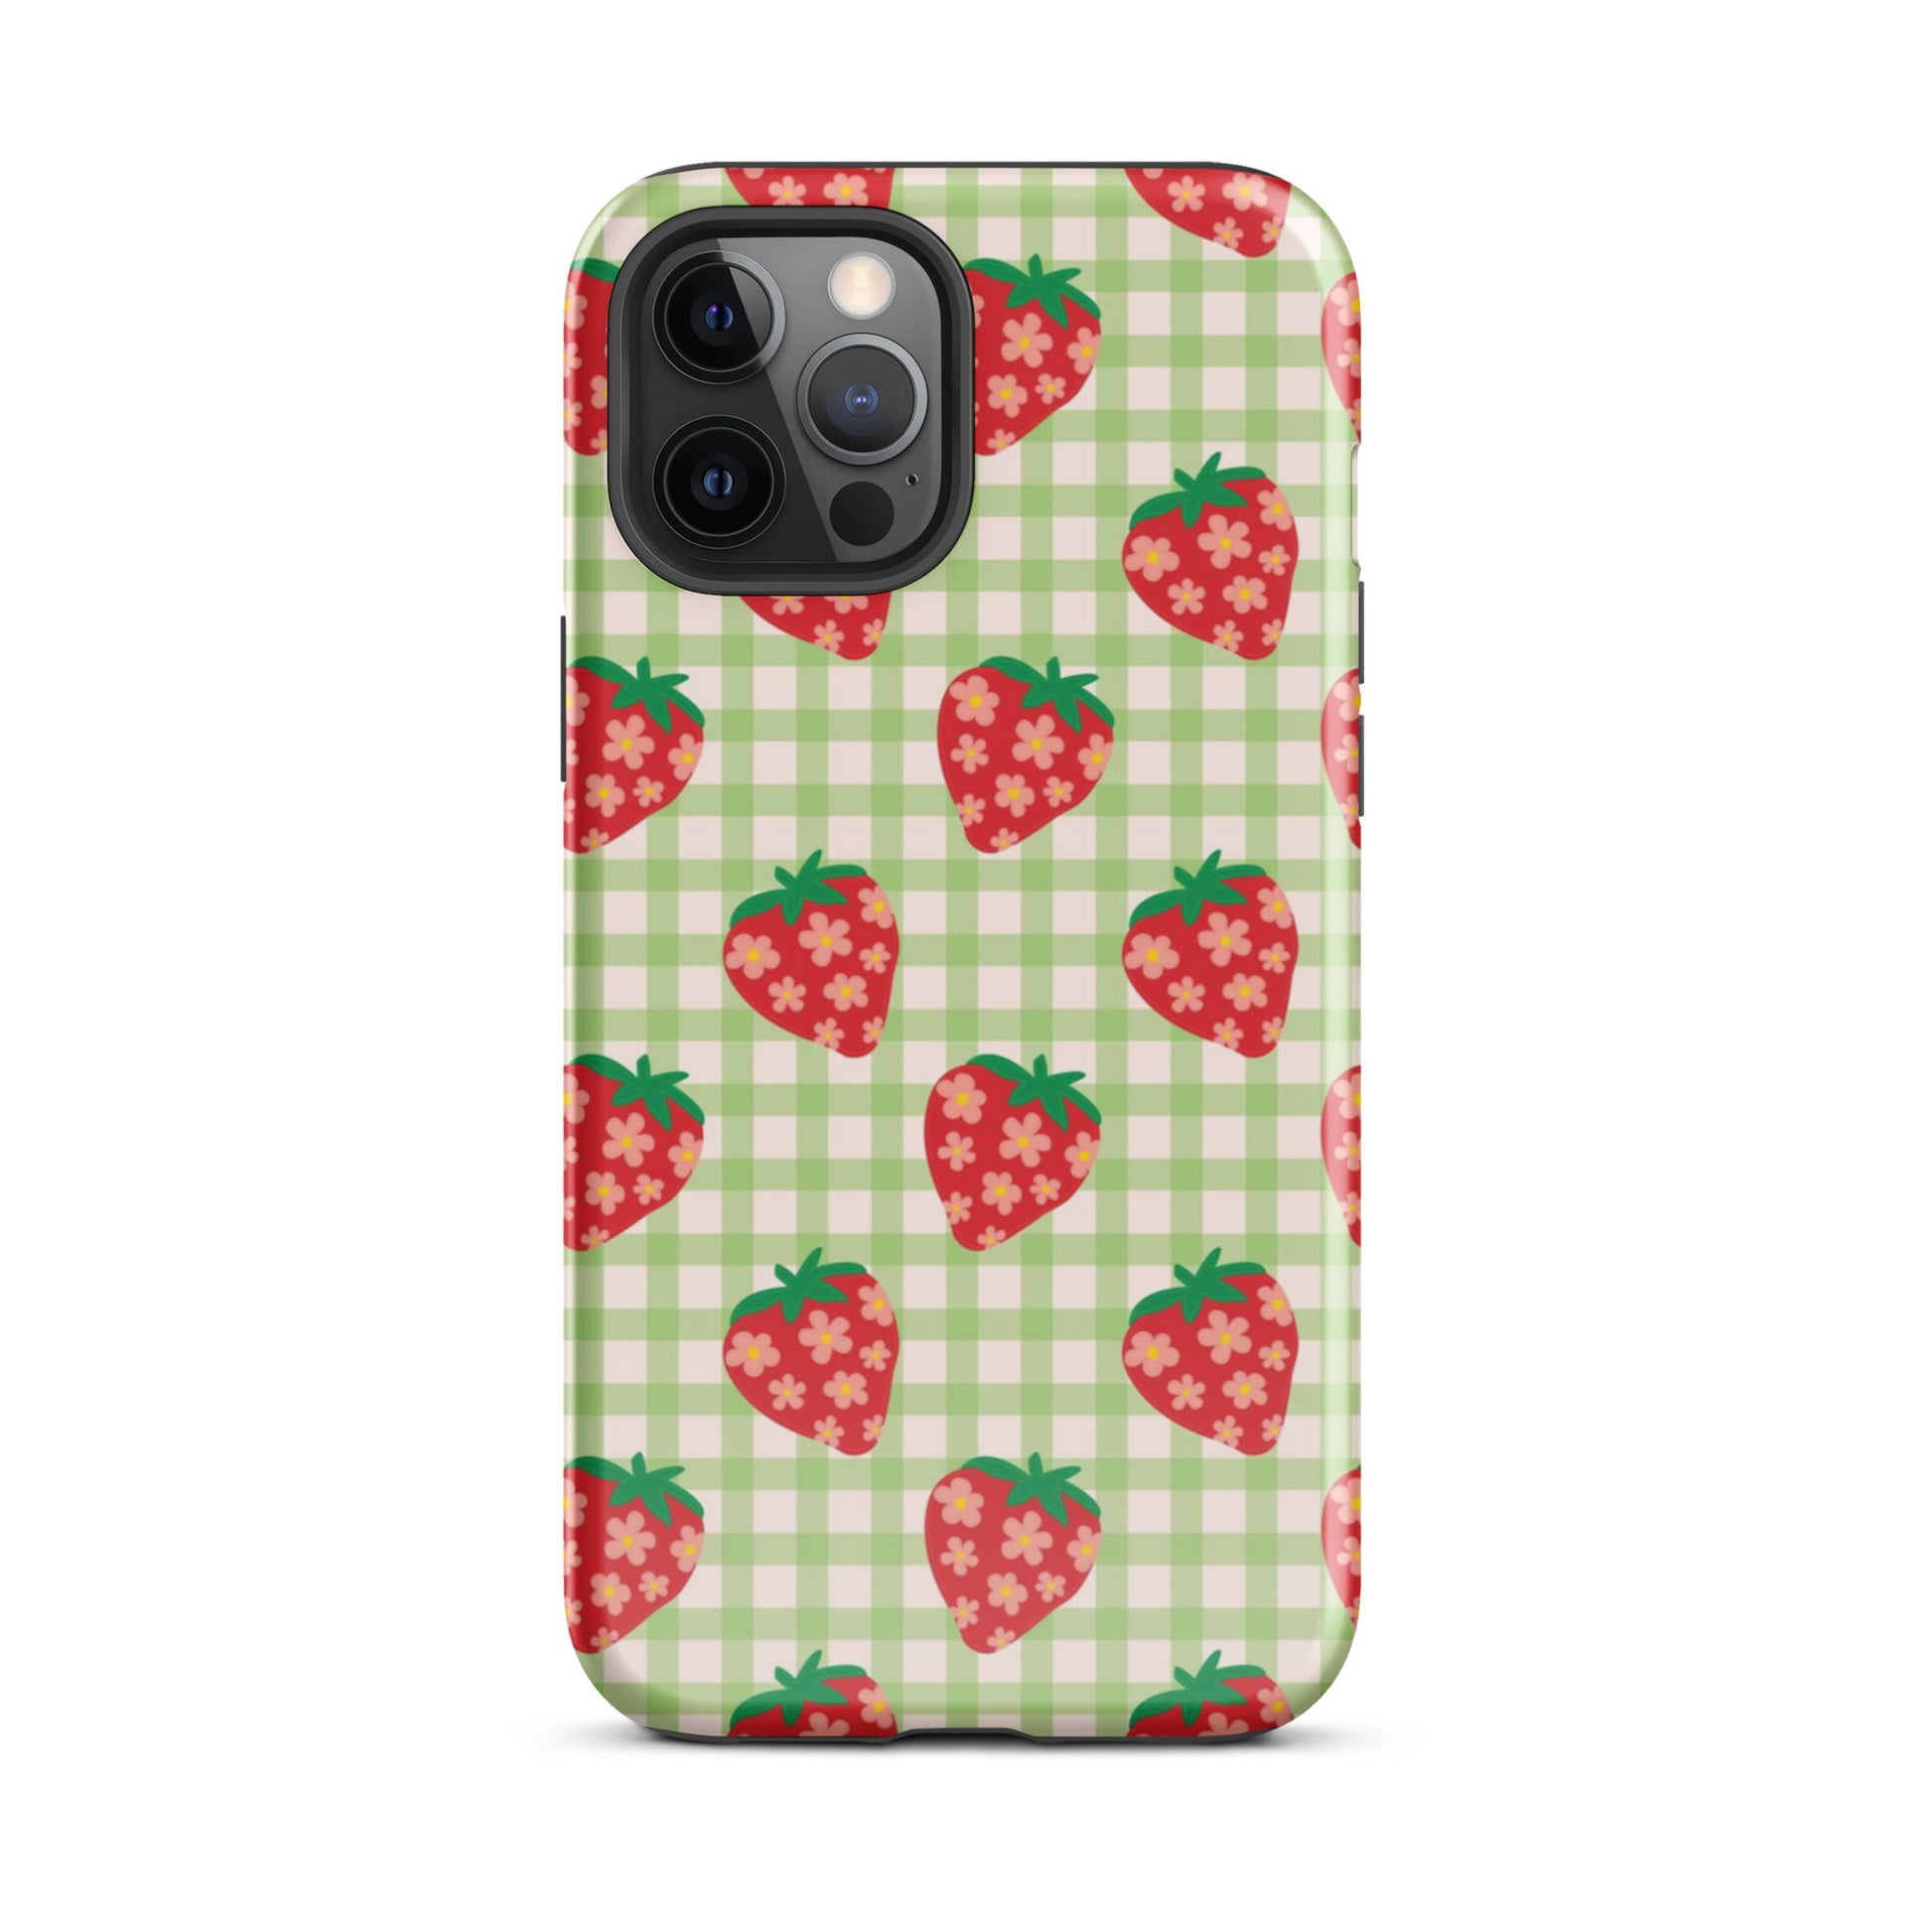 Strawberry Picnic iPhone Case iPhone 12 Pro Max Glossy